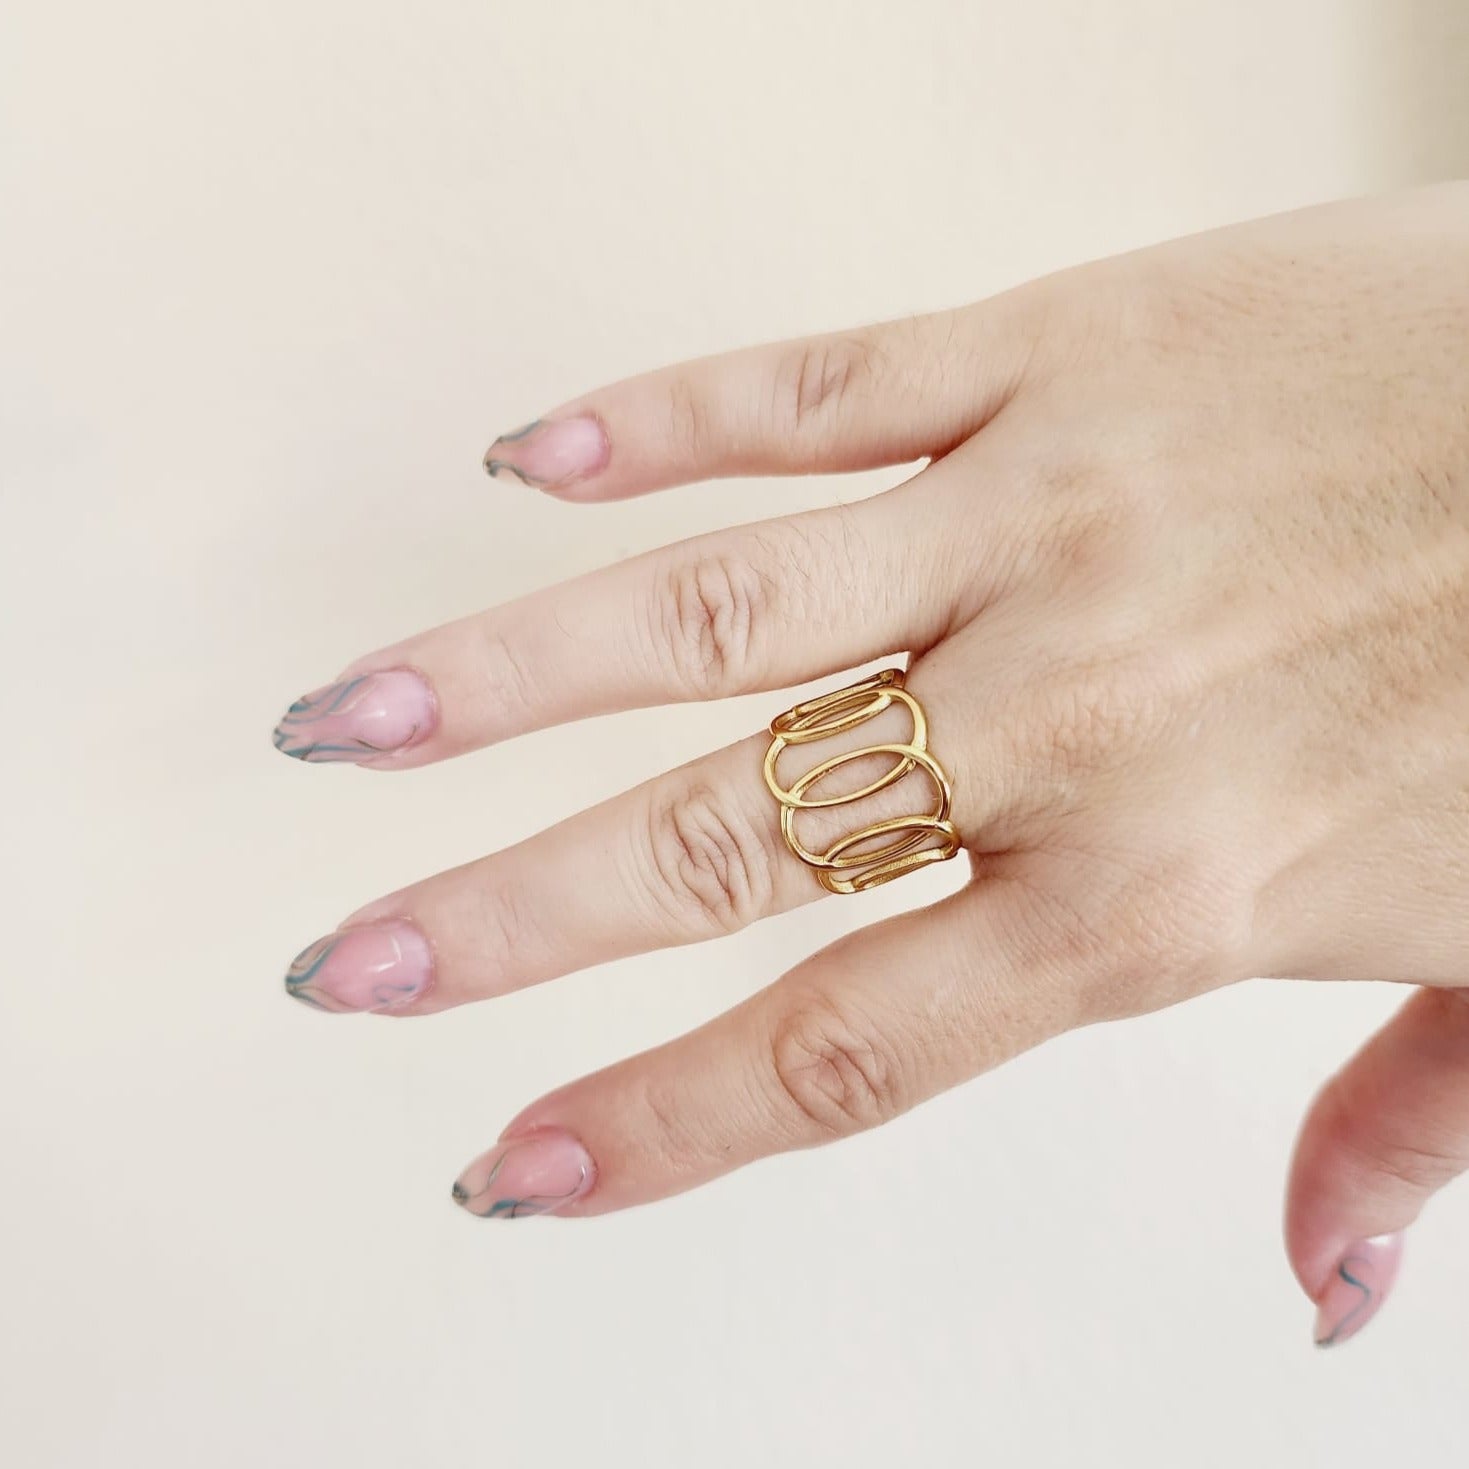 Bold Sun Ring, gold sun Ring, Chunky sun ring, vintage sun bold ring, Adjustable Gold ring, Adjustable Gold ring, dainty leaves ring, Delicate and simple ring, chunky star ring, green gold ring, waterproof ring, hypoallergenic ring, untarnish ring, anti tarnish ring, anillo de estrellas, Water Resistant